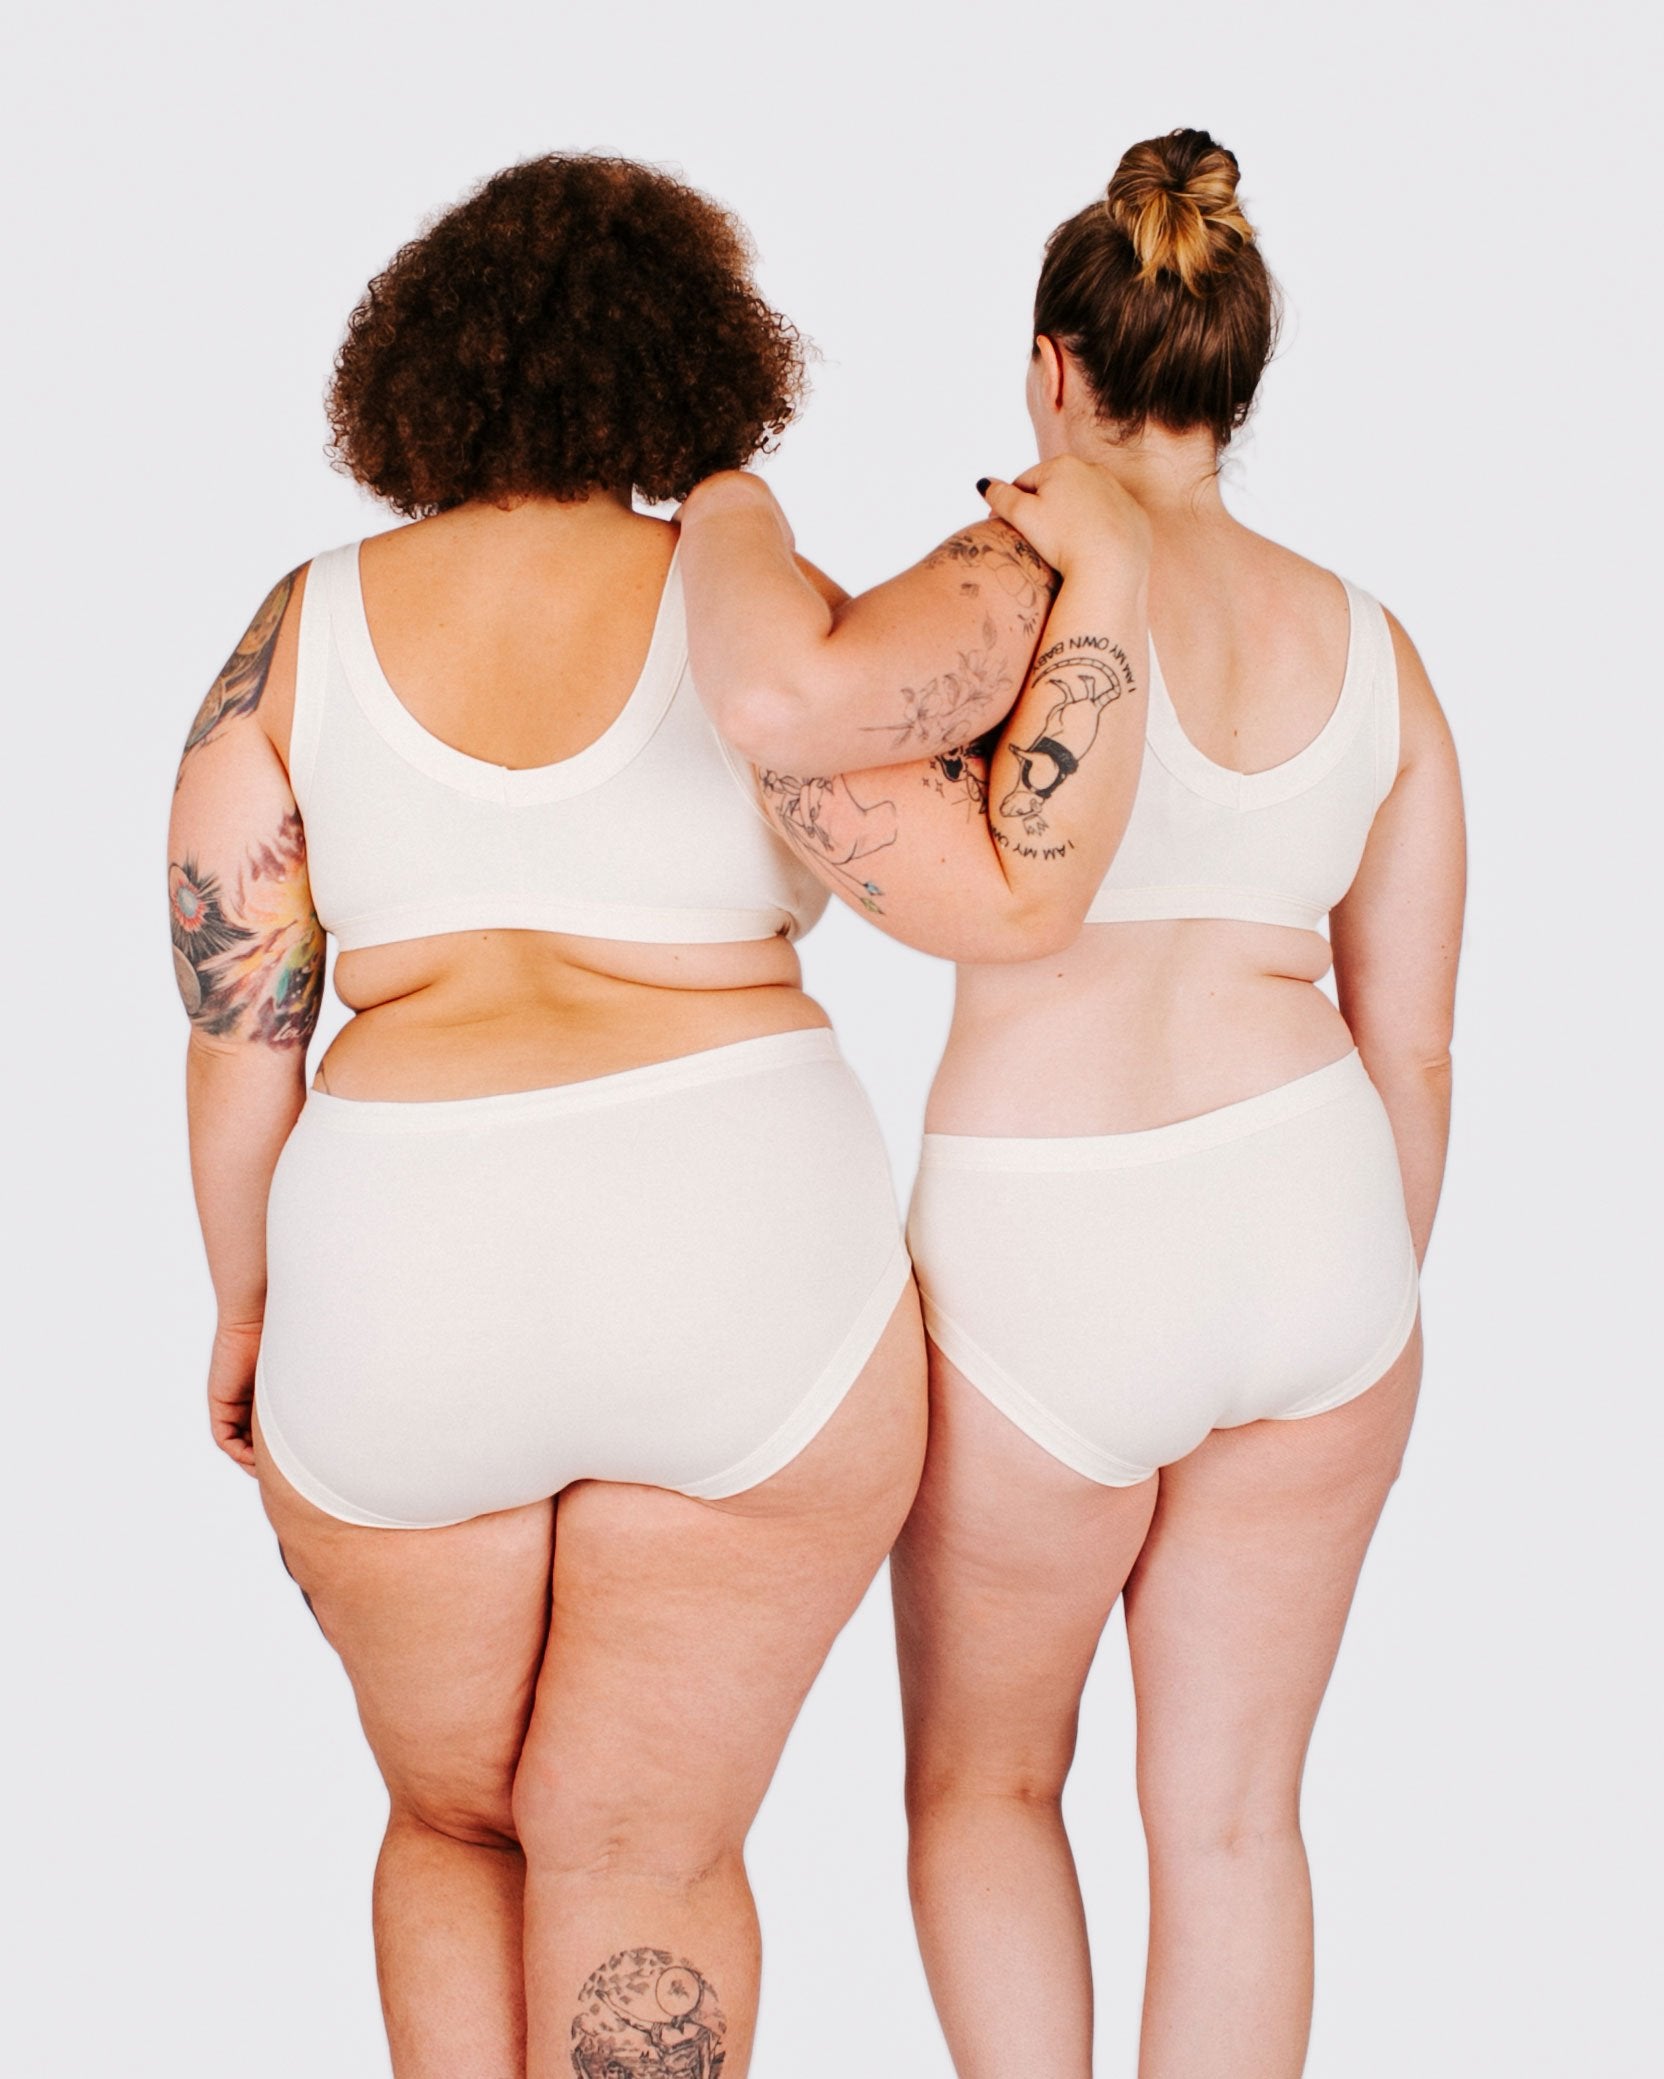 Fit photo from the front of Thunderpants organic cotton Hipster style underwear and Bralette in off-white on two model standing together.